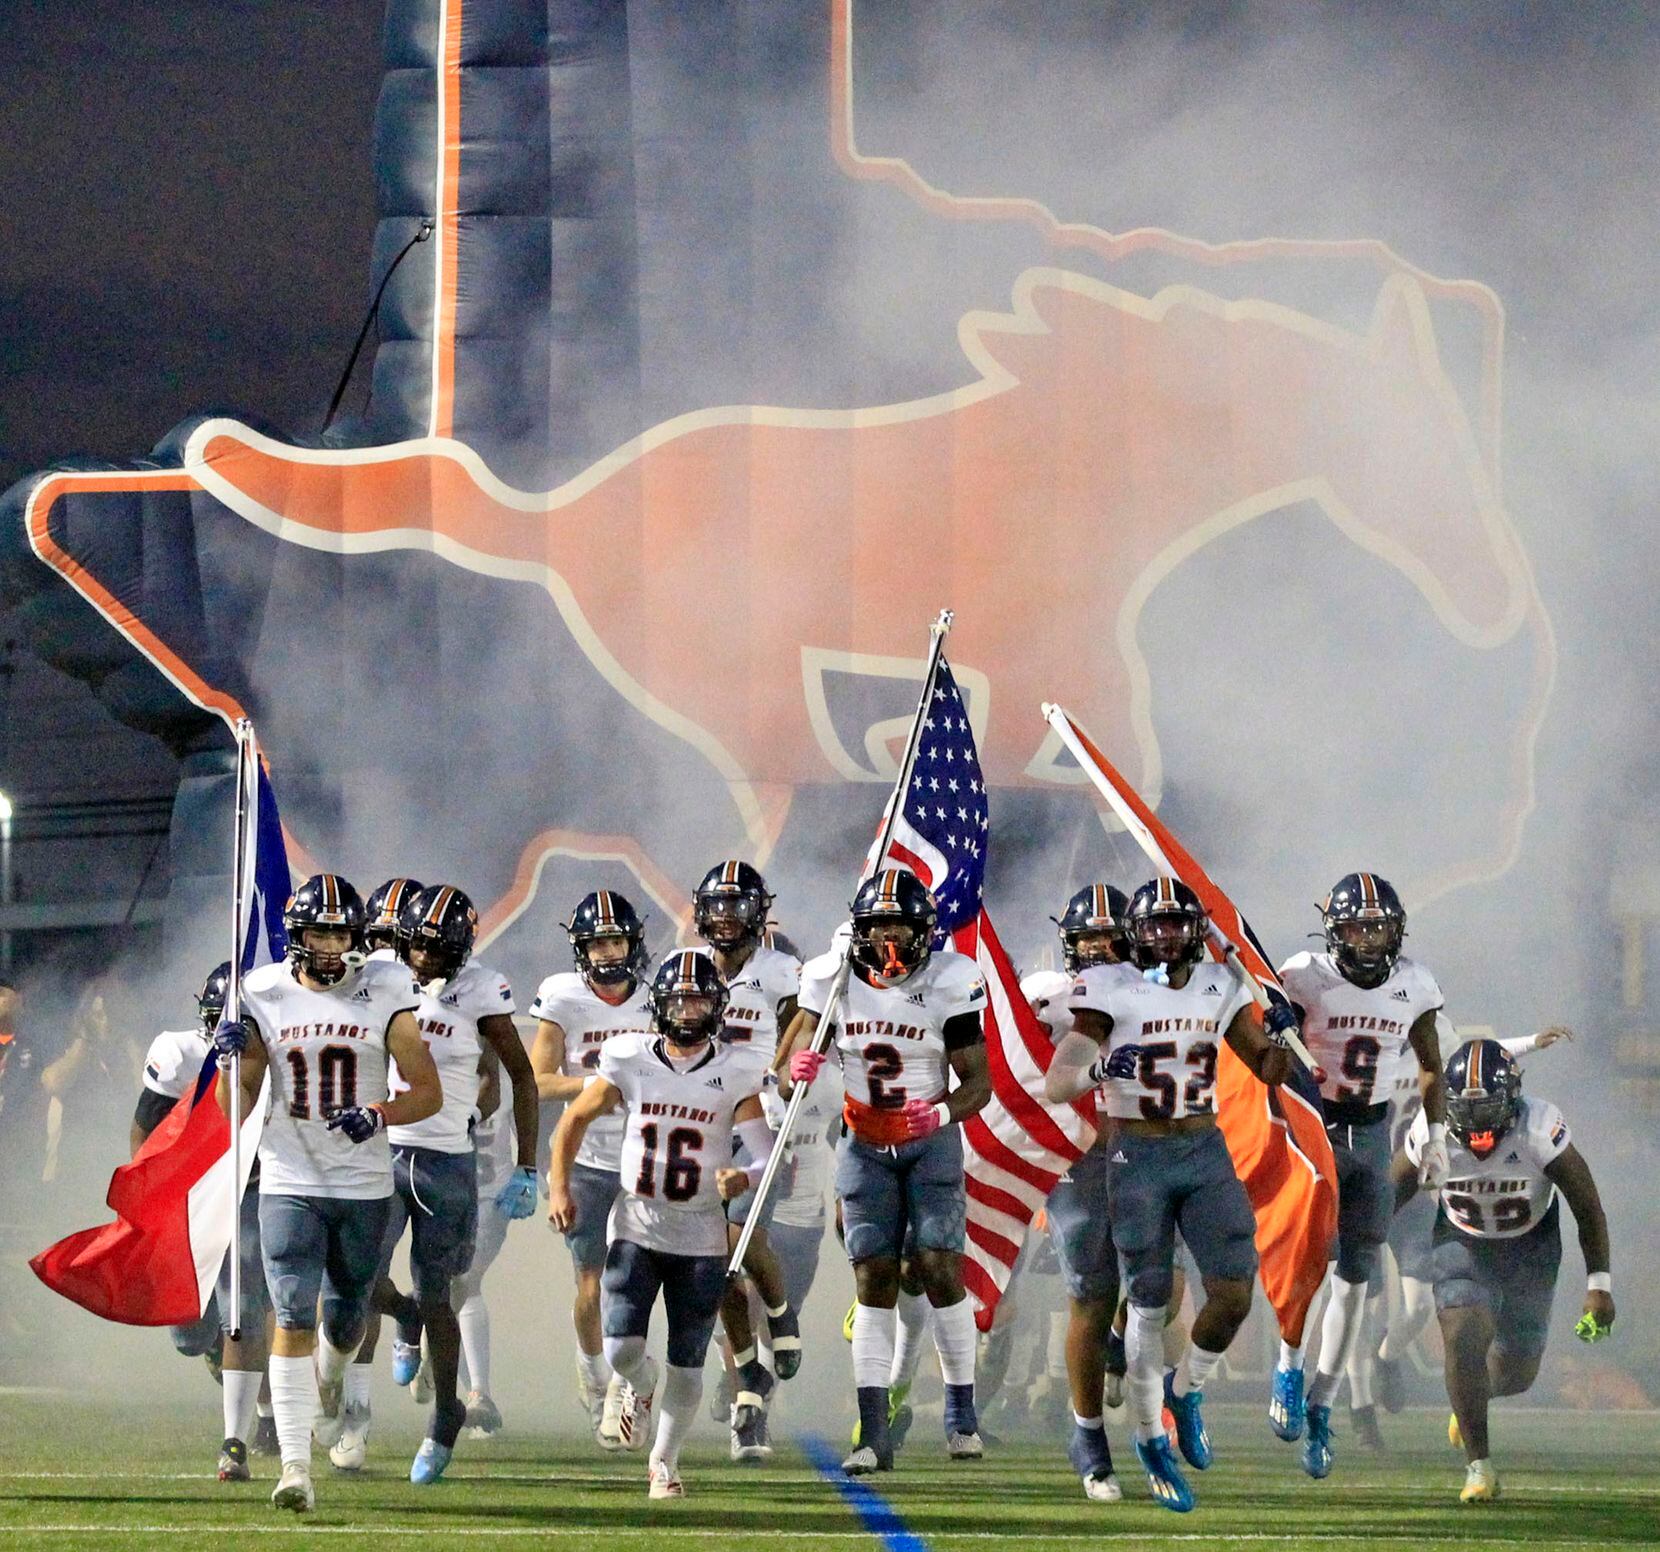 The Sachse Mustangs enter the field in a cloud of smoke before the start of a high school...